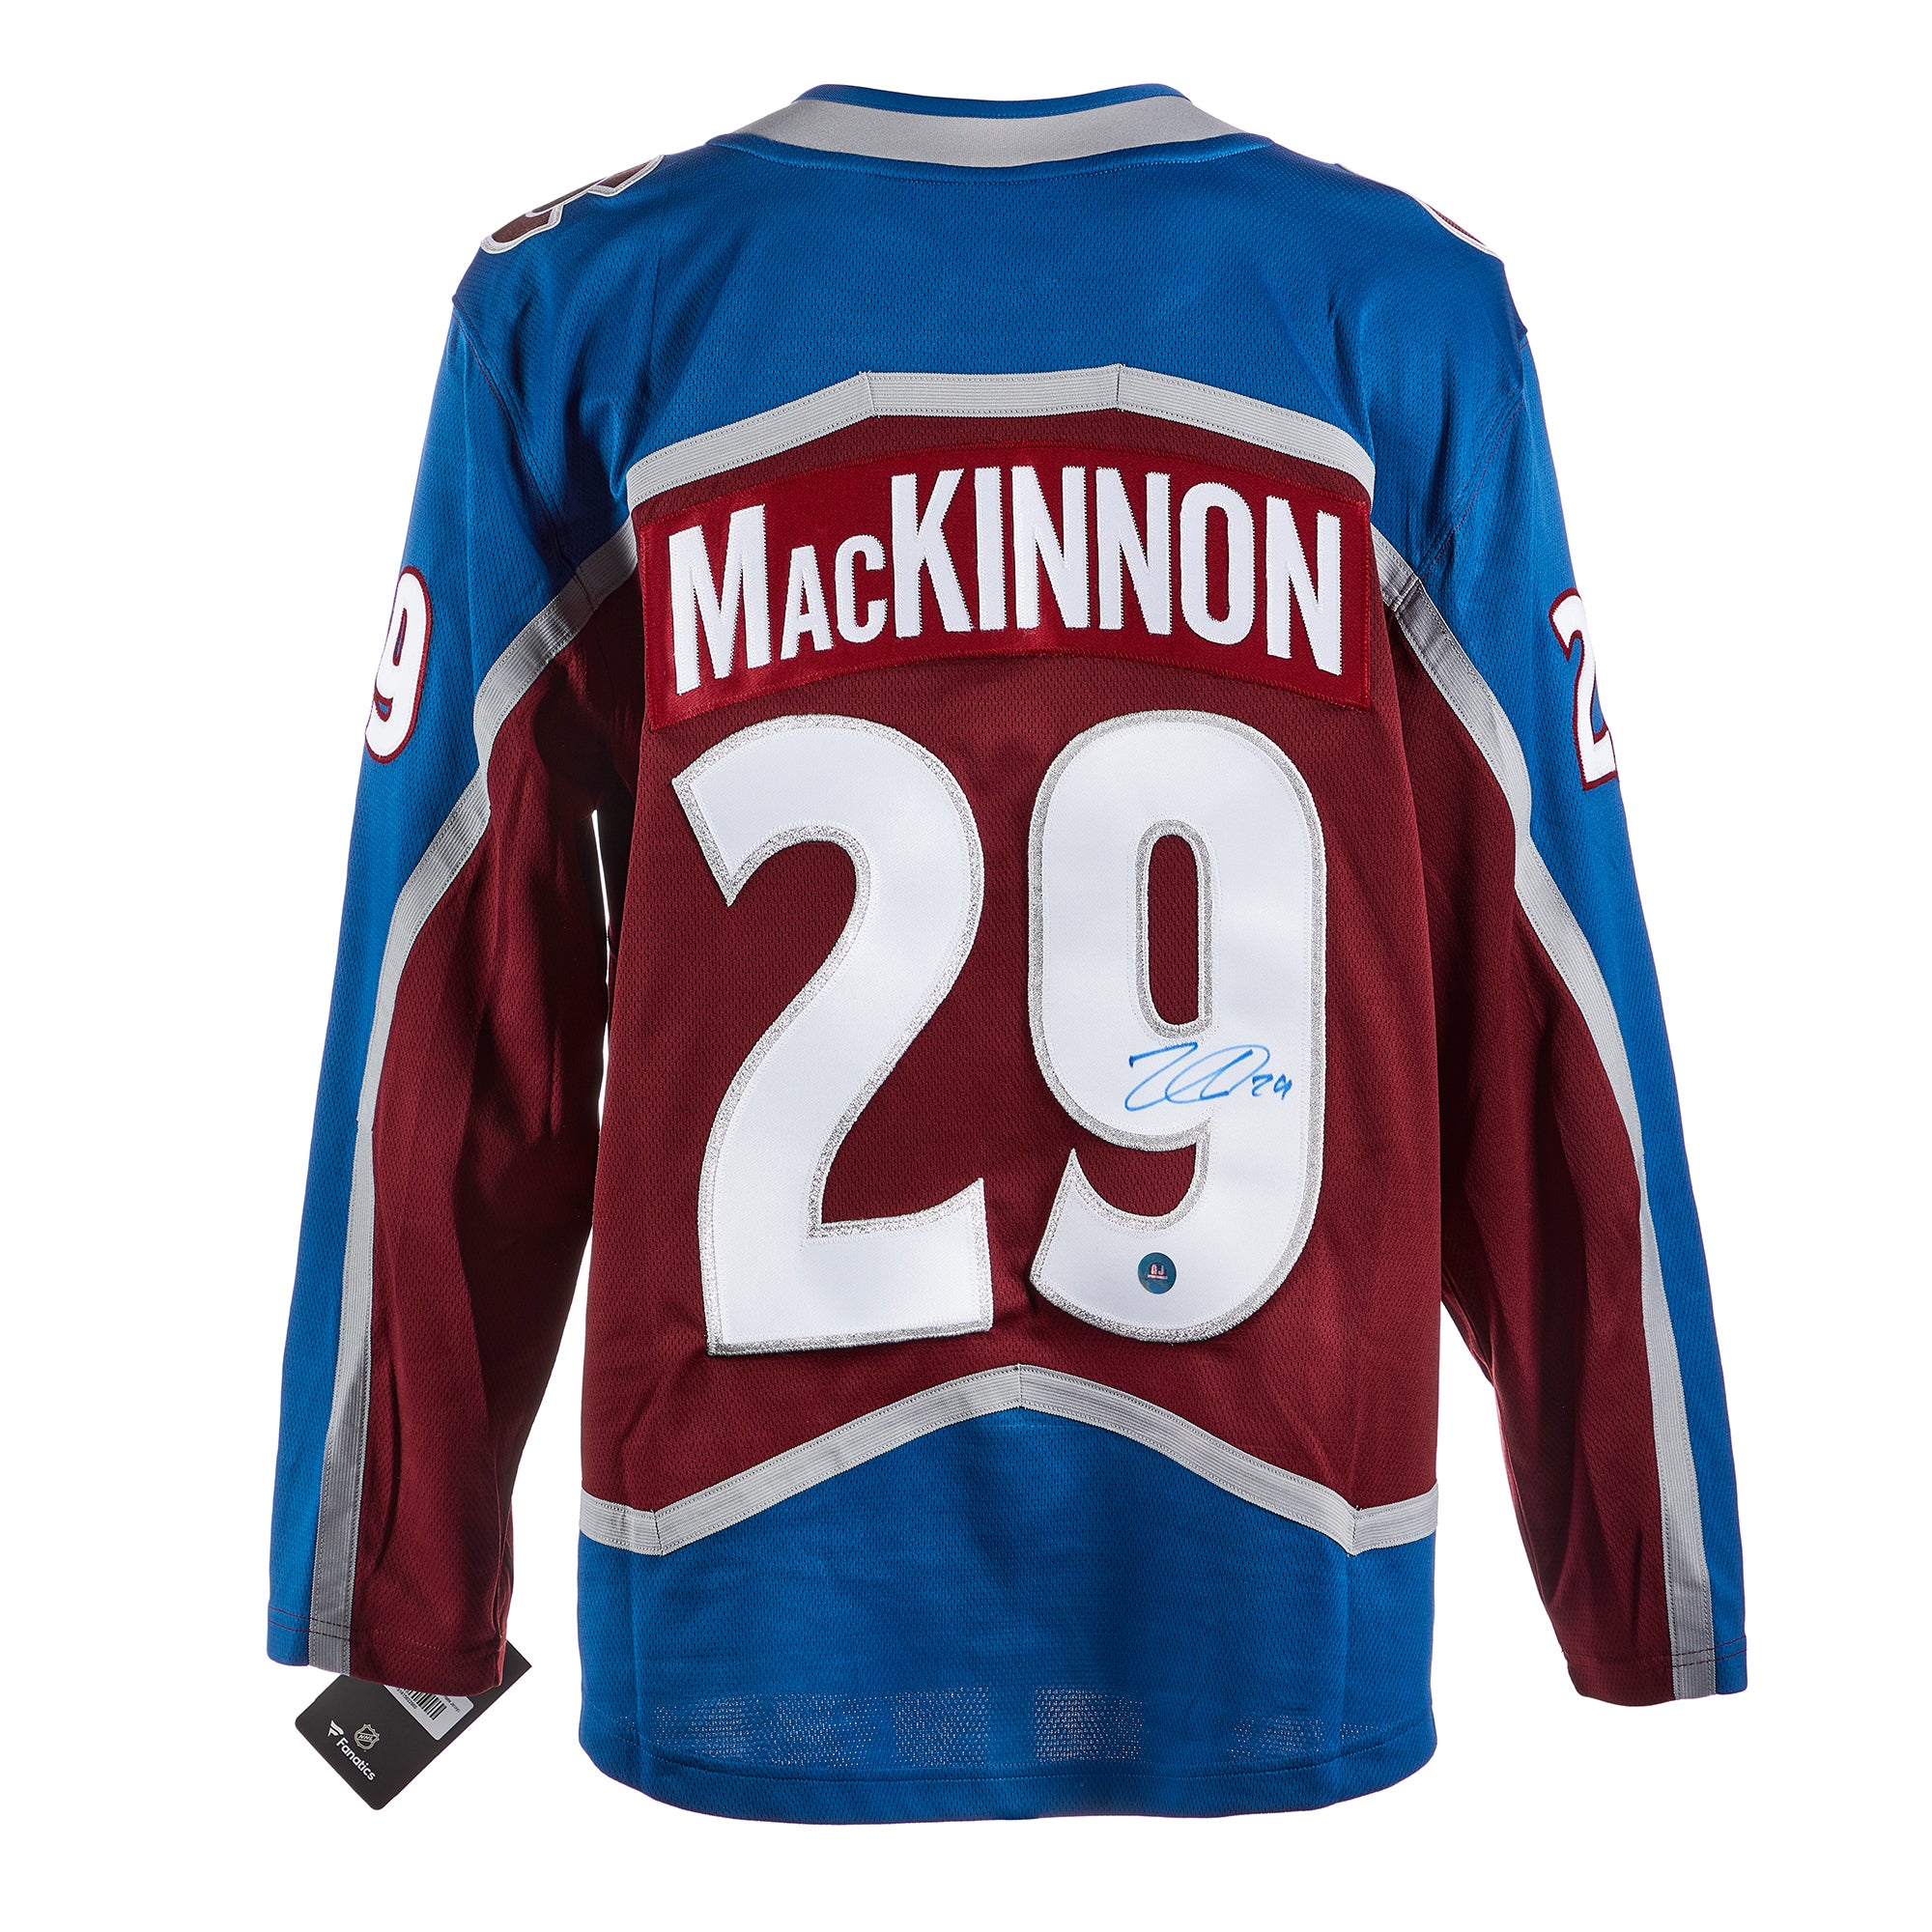 Nathan MacKinnon Nordiques Jersey